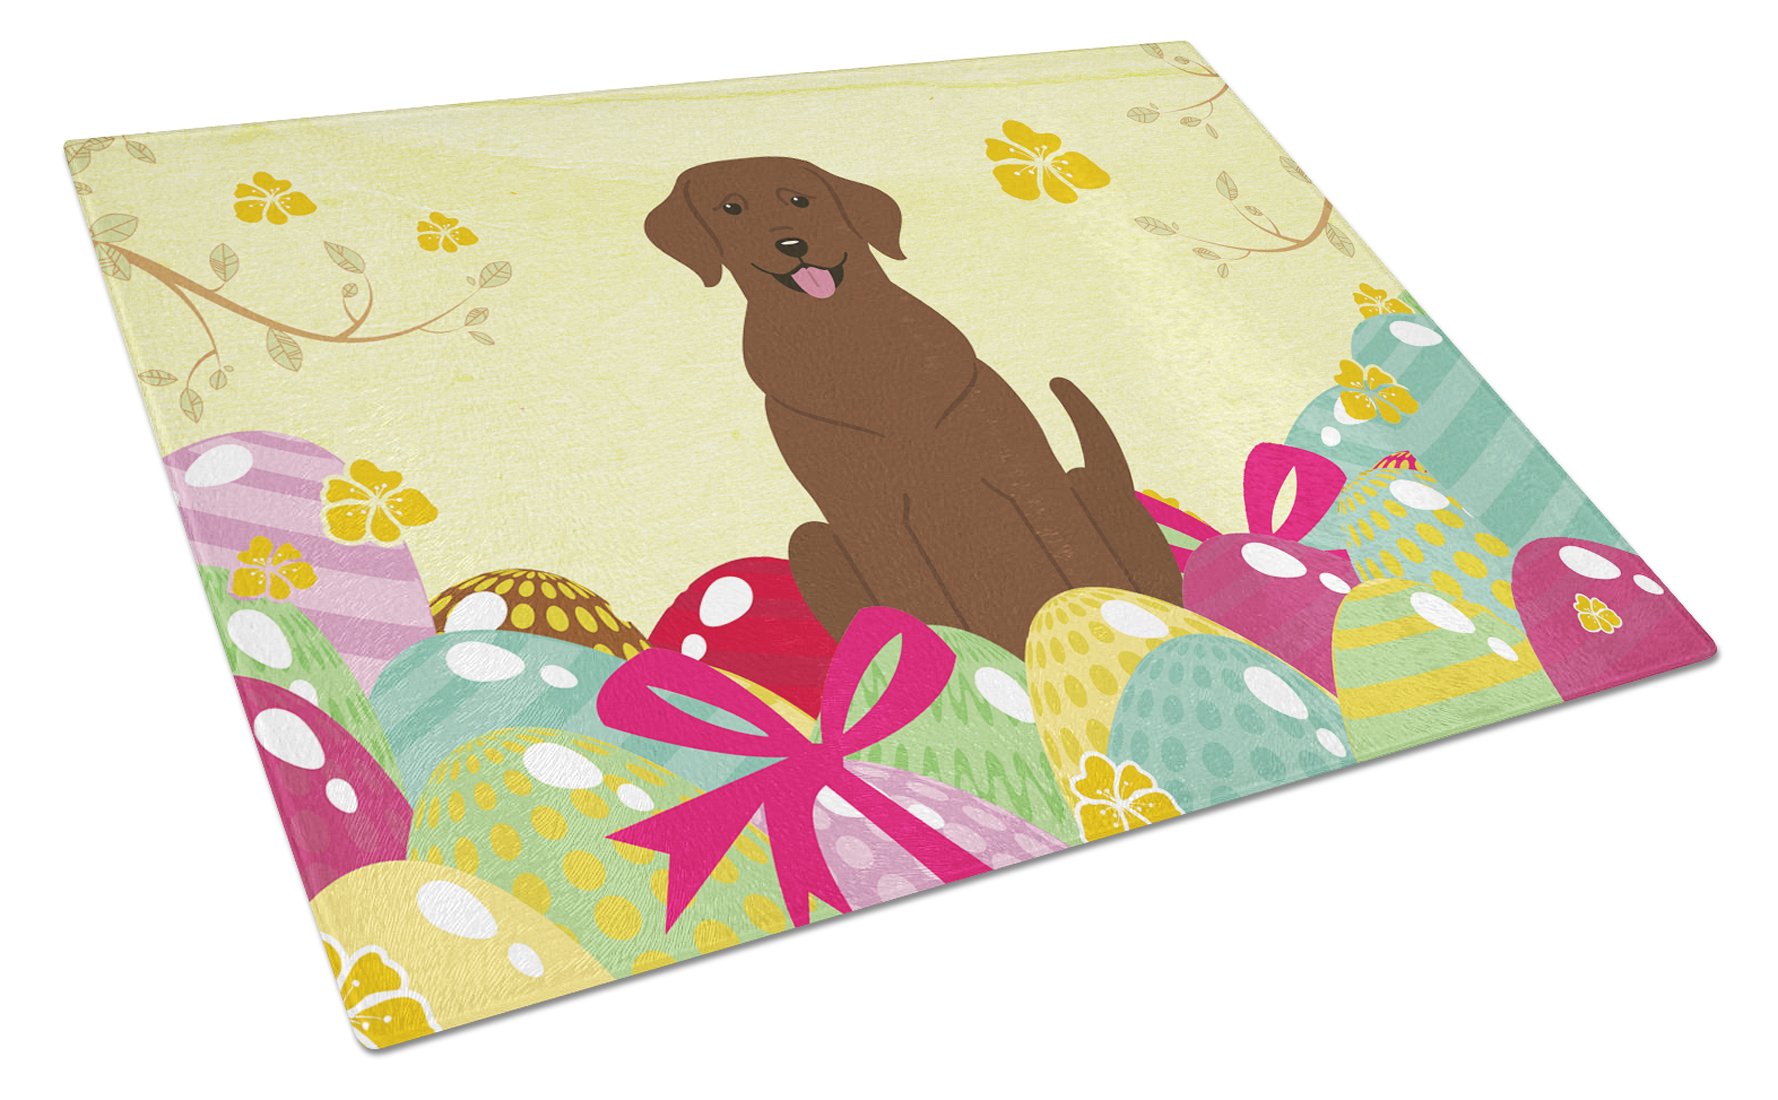 Easter Eggs Chocolate Labrador Glass Cutting Board Large BB6056LCB by Caroline's Treasures